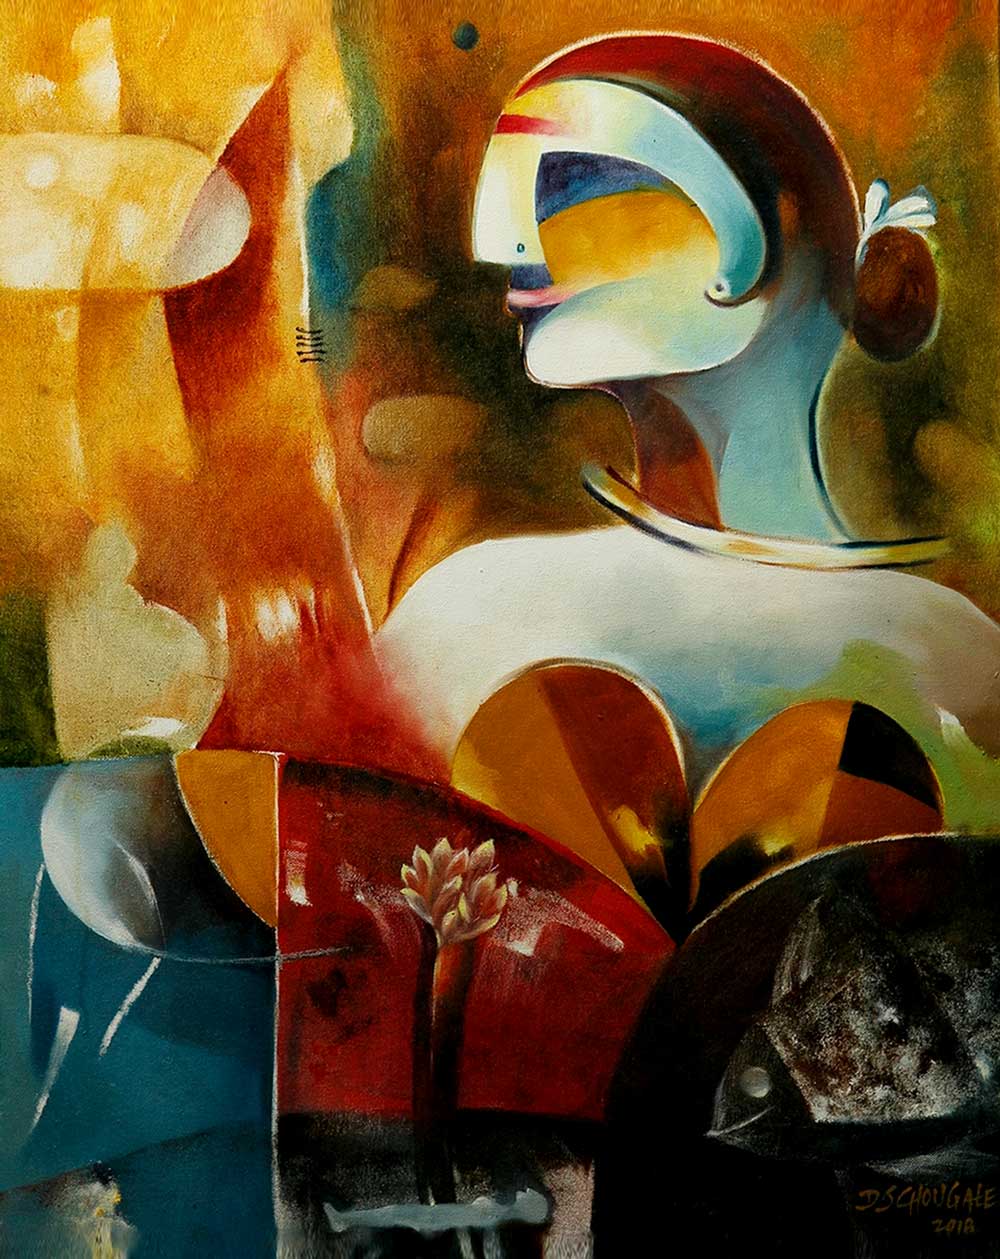 Figurative Painting with Oil on Canvas "Untitled-1" art by Dr D S Chougale